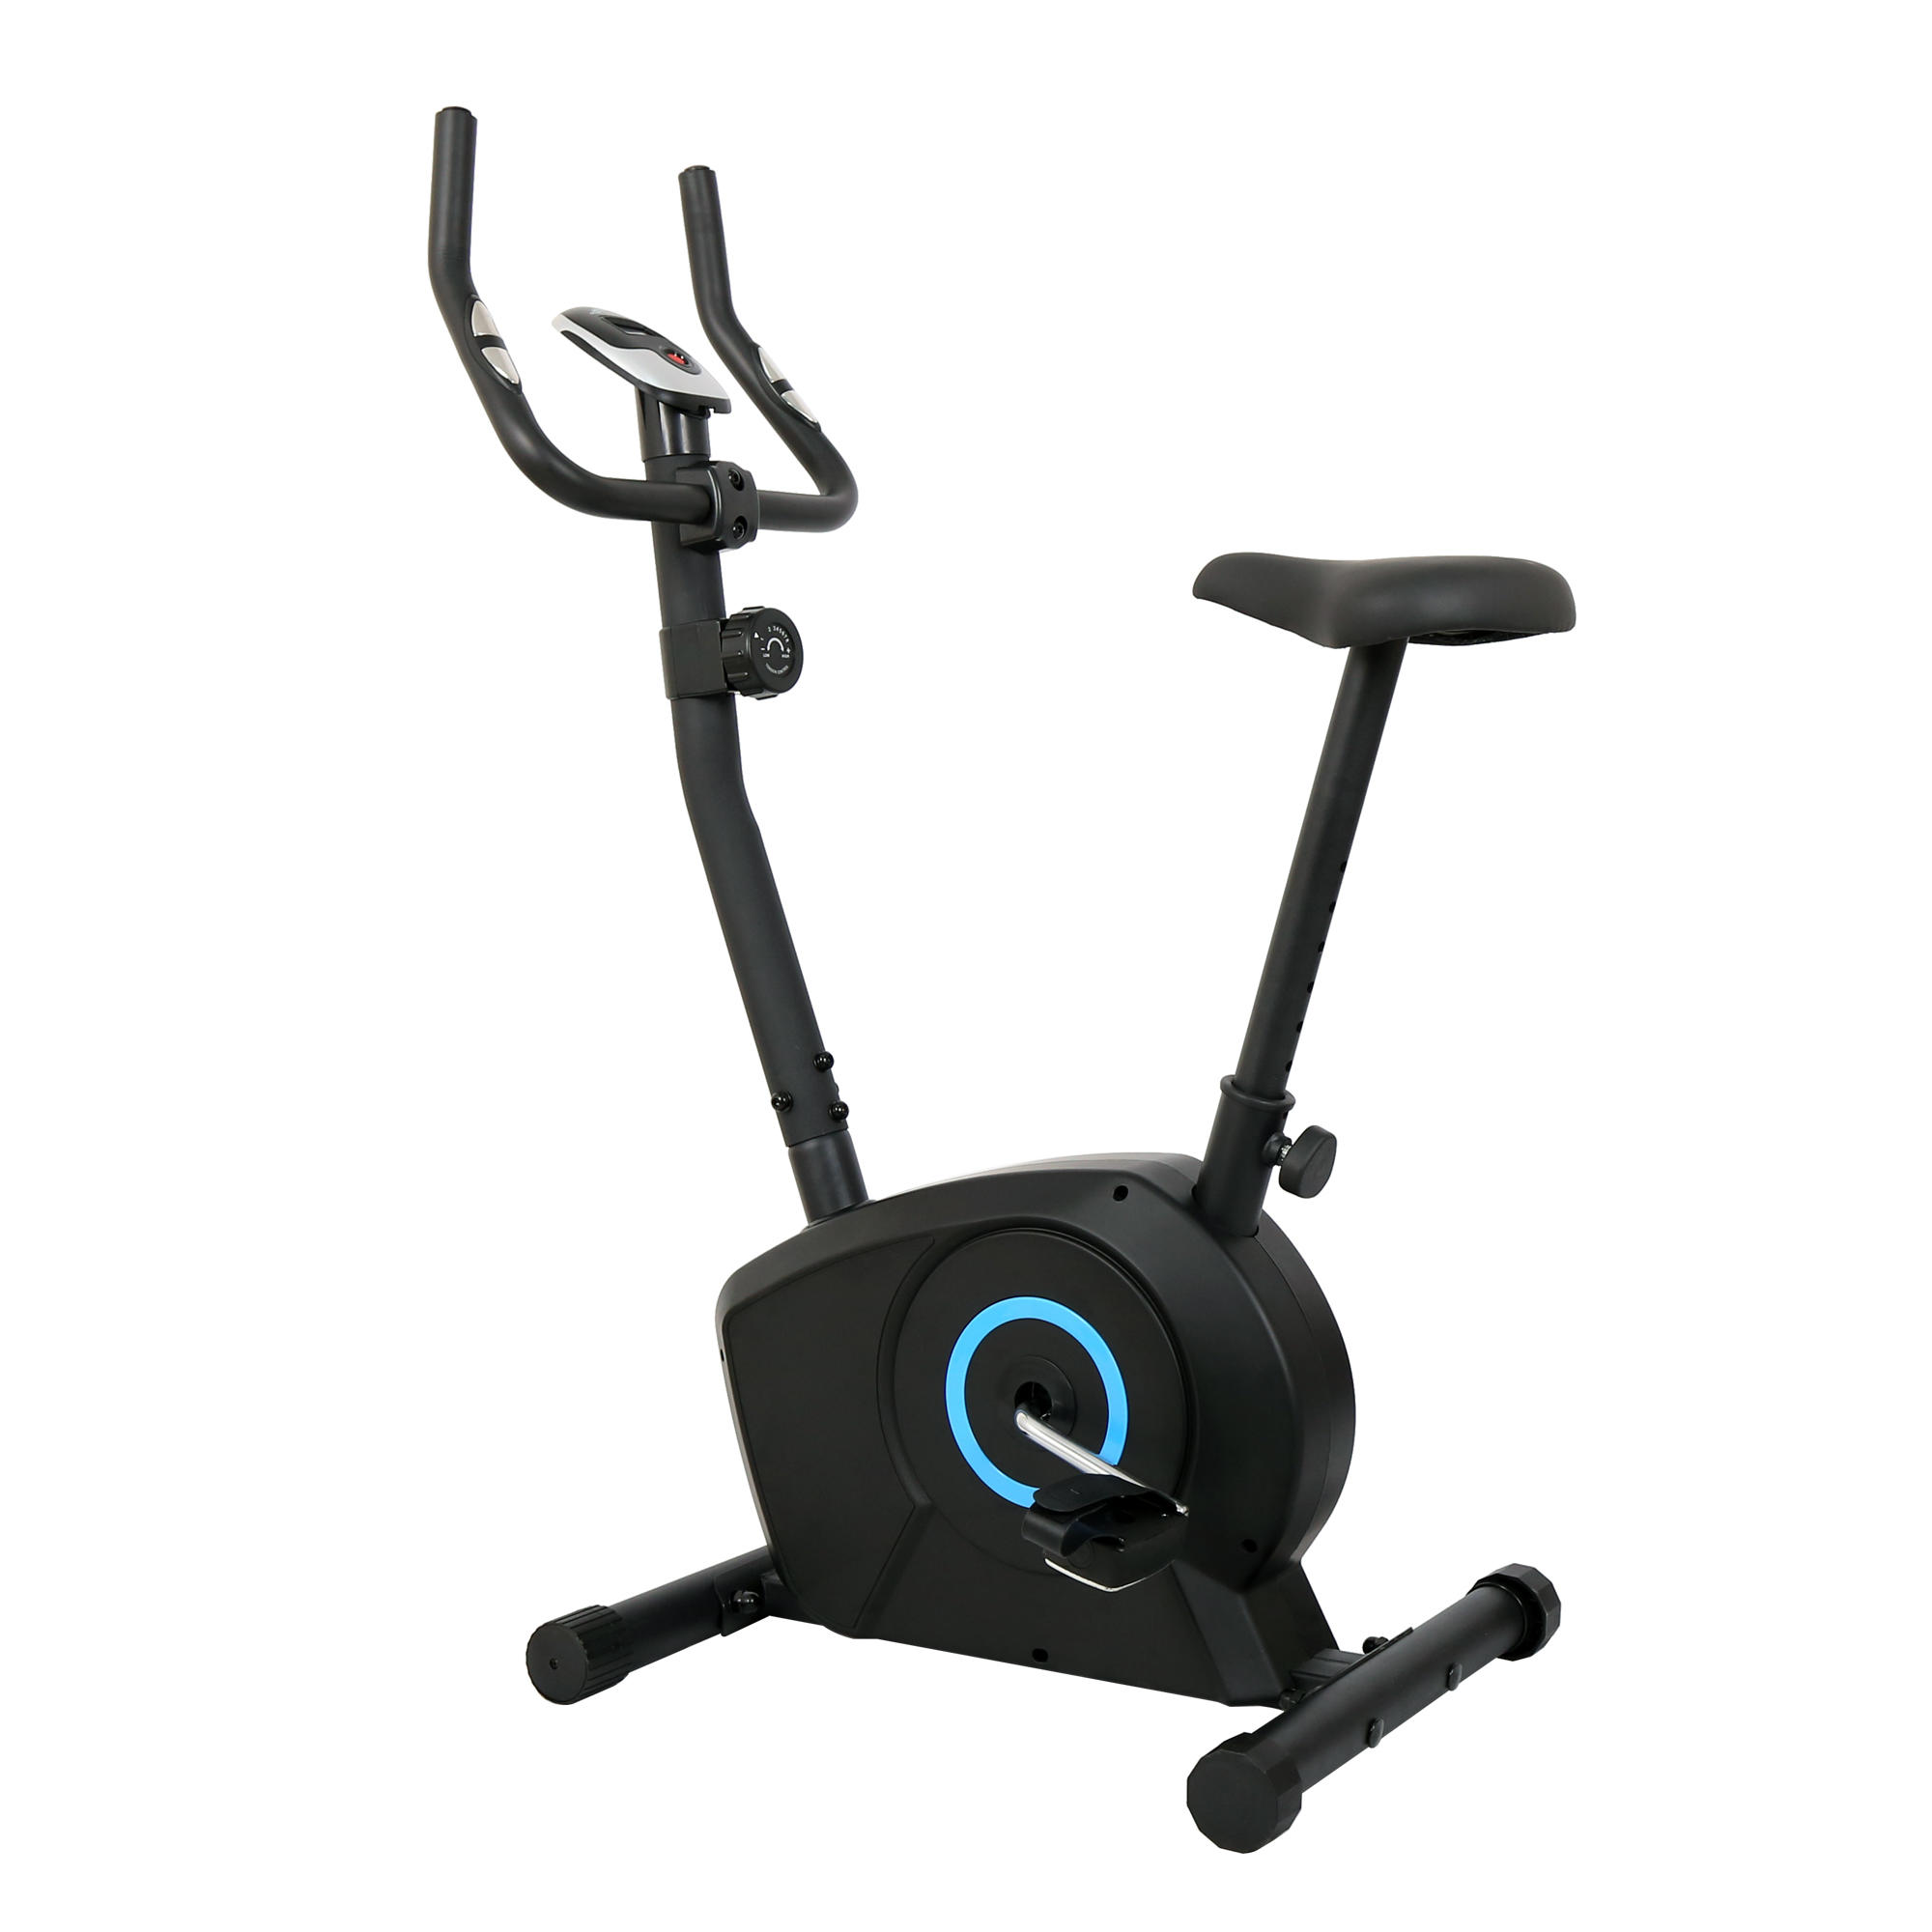 A cutting-edge, magnetic resistance bike offering convenience, efficiency, and modern fitness technology